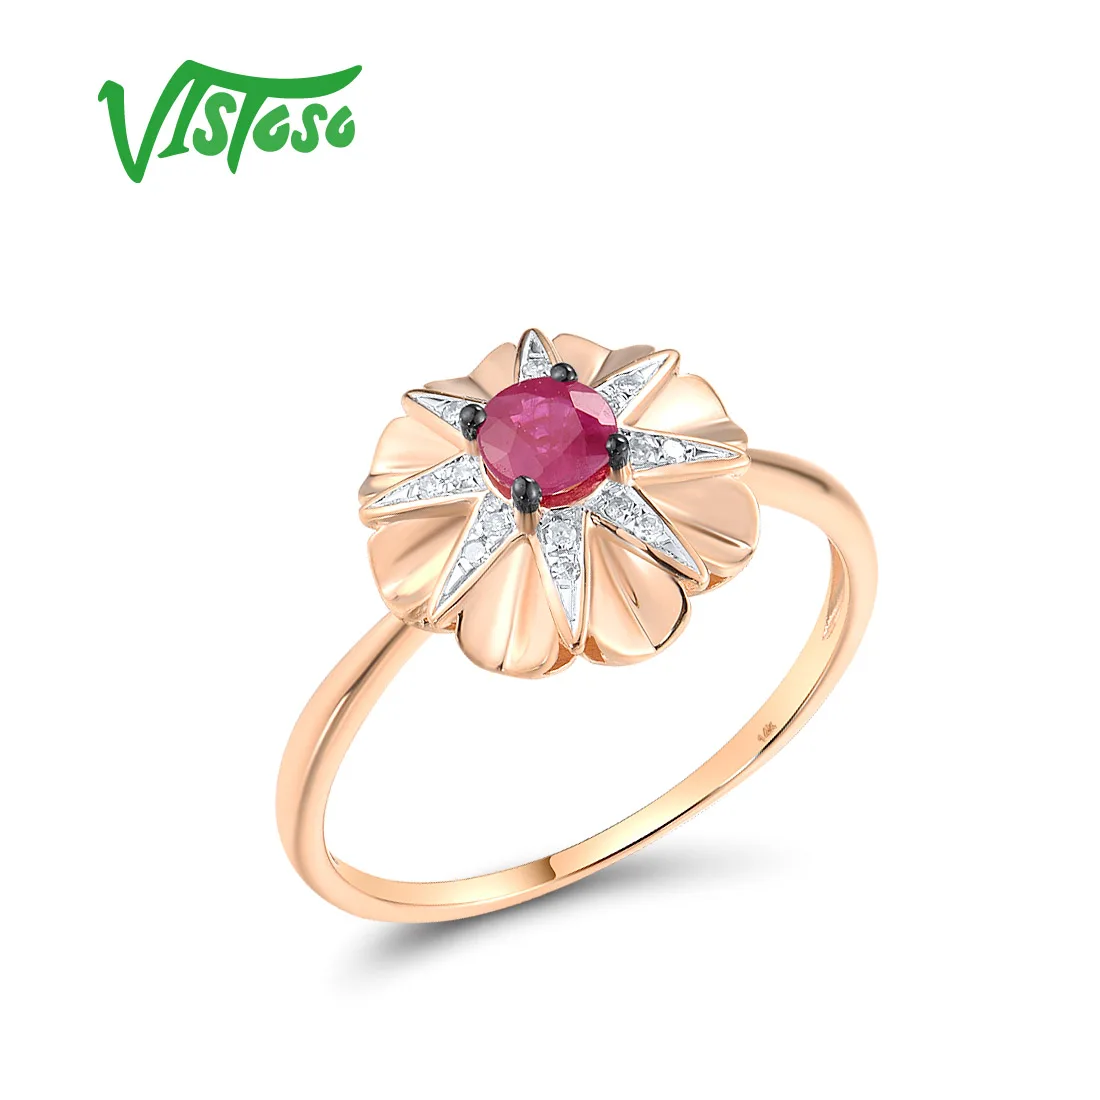 

VISTOSO Authentic 14K 585 Rose Gold Ring For Women Sparkling Diamond Ruby Delicate Wedding Engagement Cute Fine Jewelry